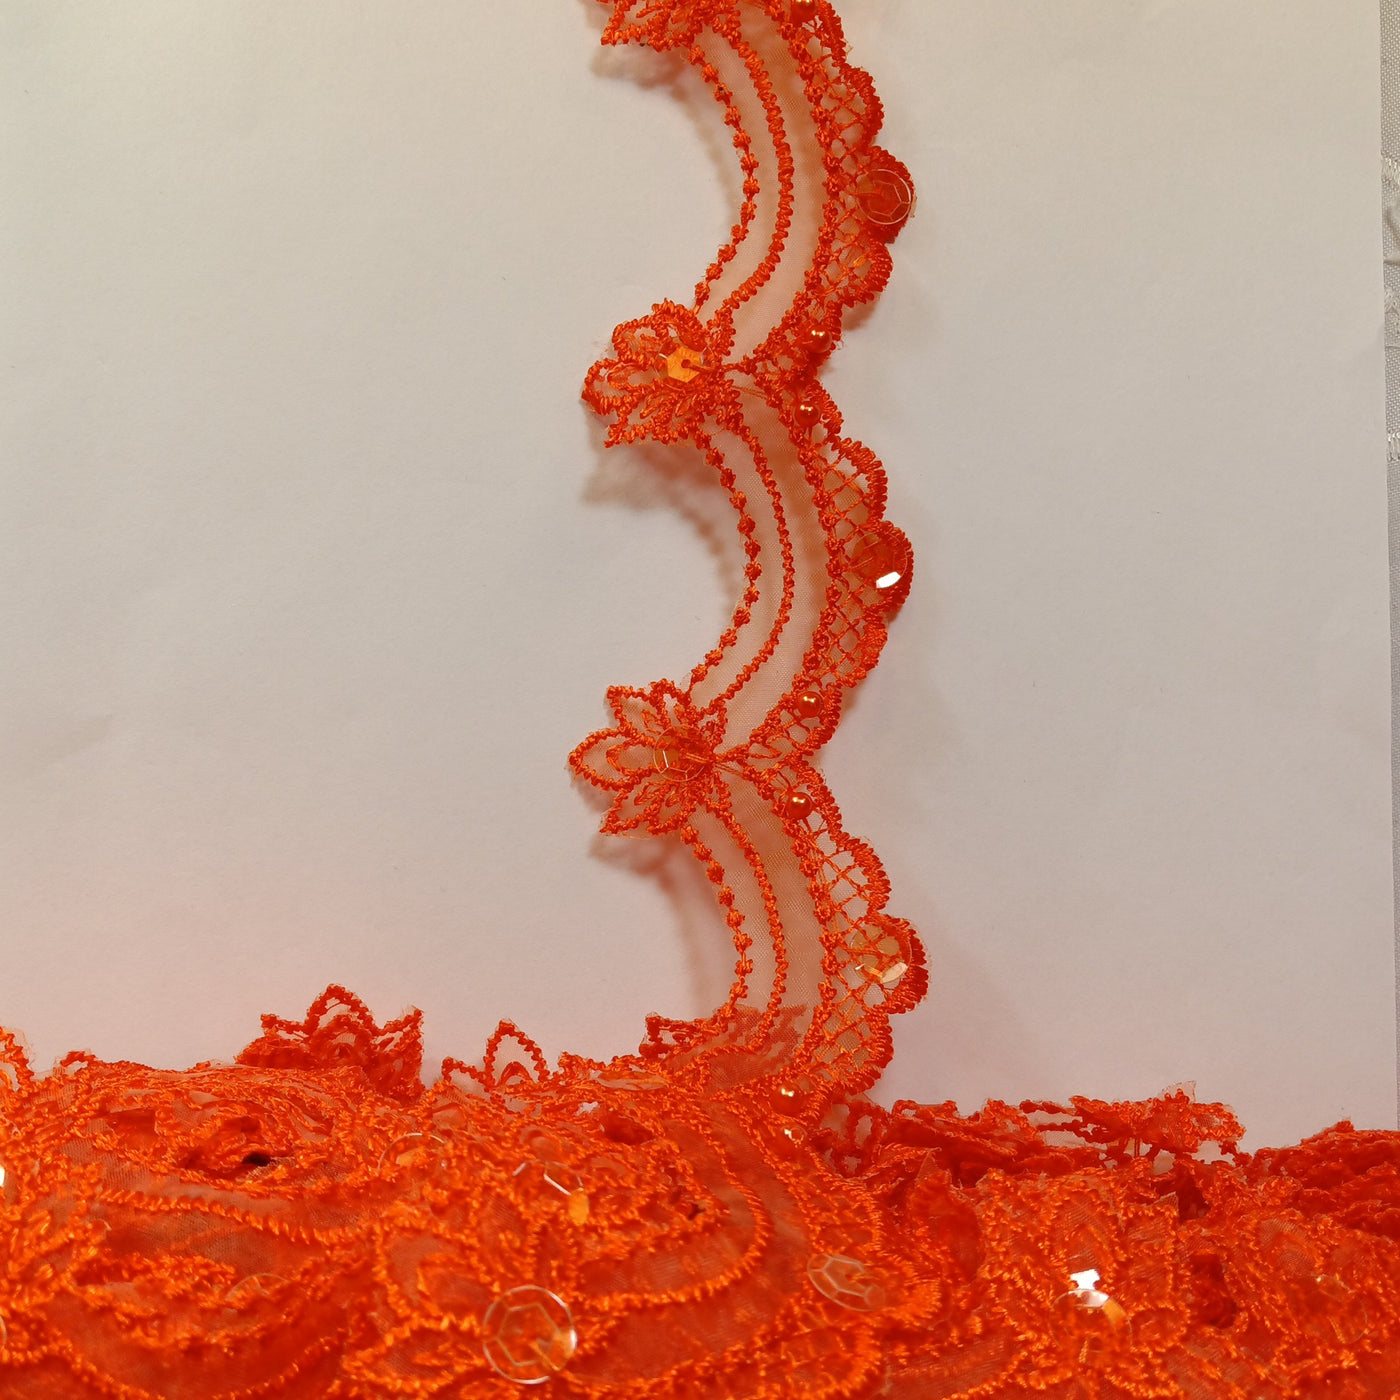 Beaded Orange Lace Trim Embroidered on 100% Polyester Organza . Large Arch Scalloped Trim. Formal Trim. Perfect for Edging and Gowns.  Sold by the Yard.  Lace Usa